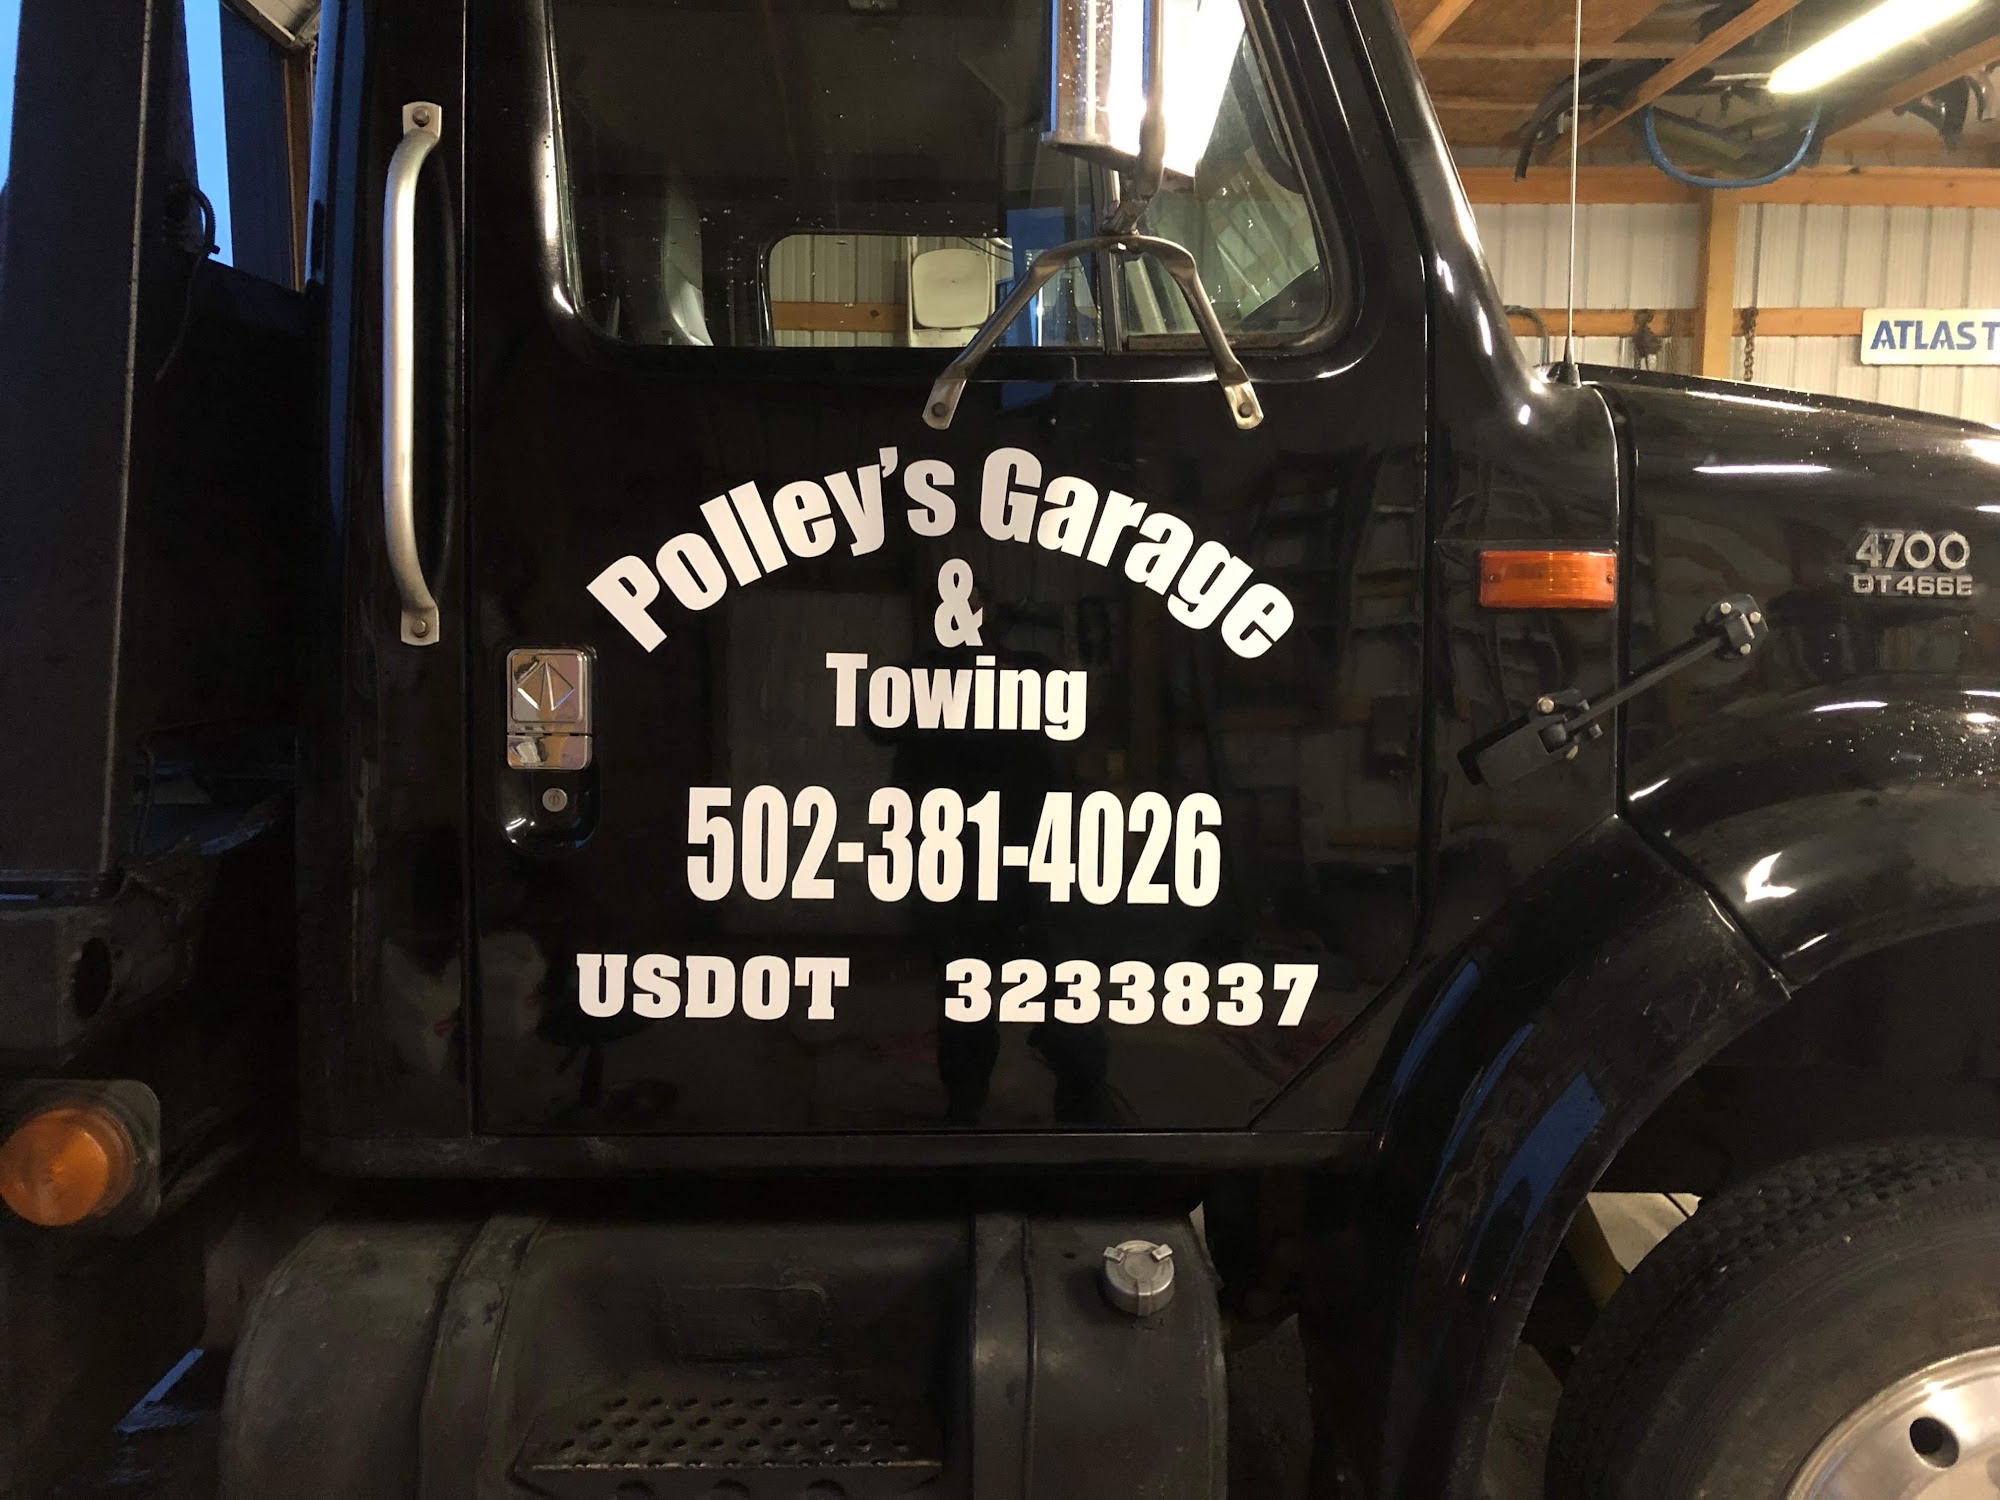 Polley’s Garage & Towing